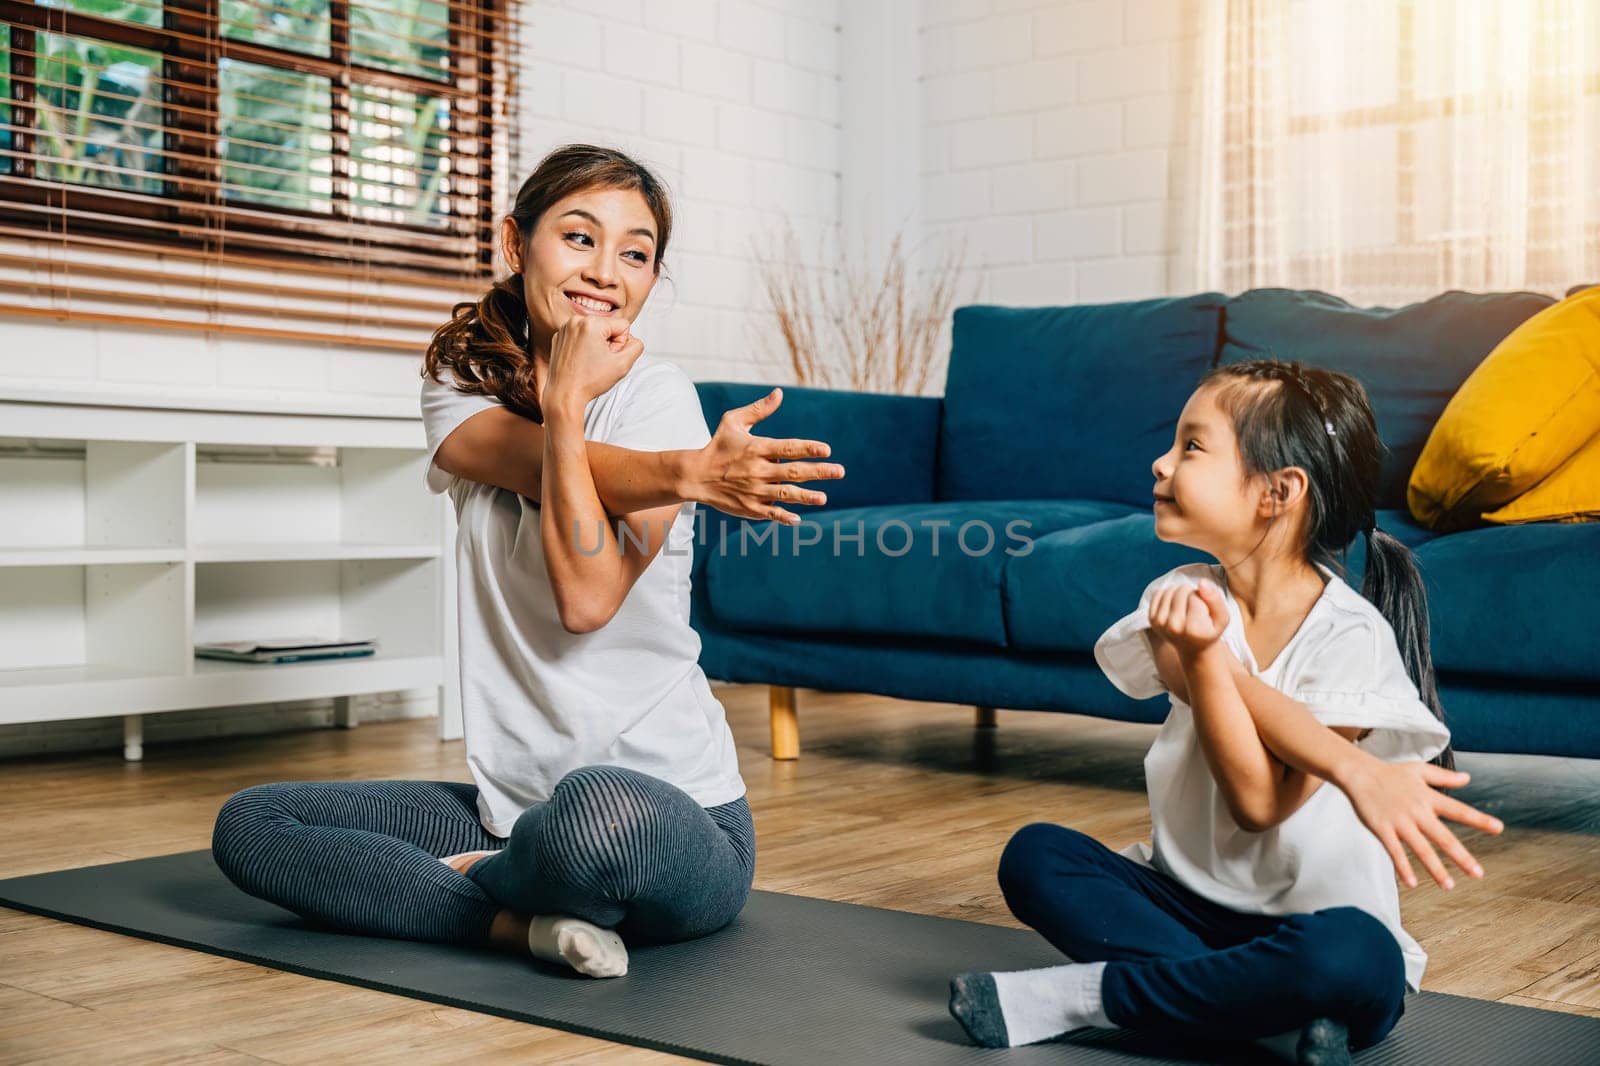 In the gym center a mother supports her daughter in stretching and yoga exercises by Sorapop